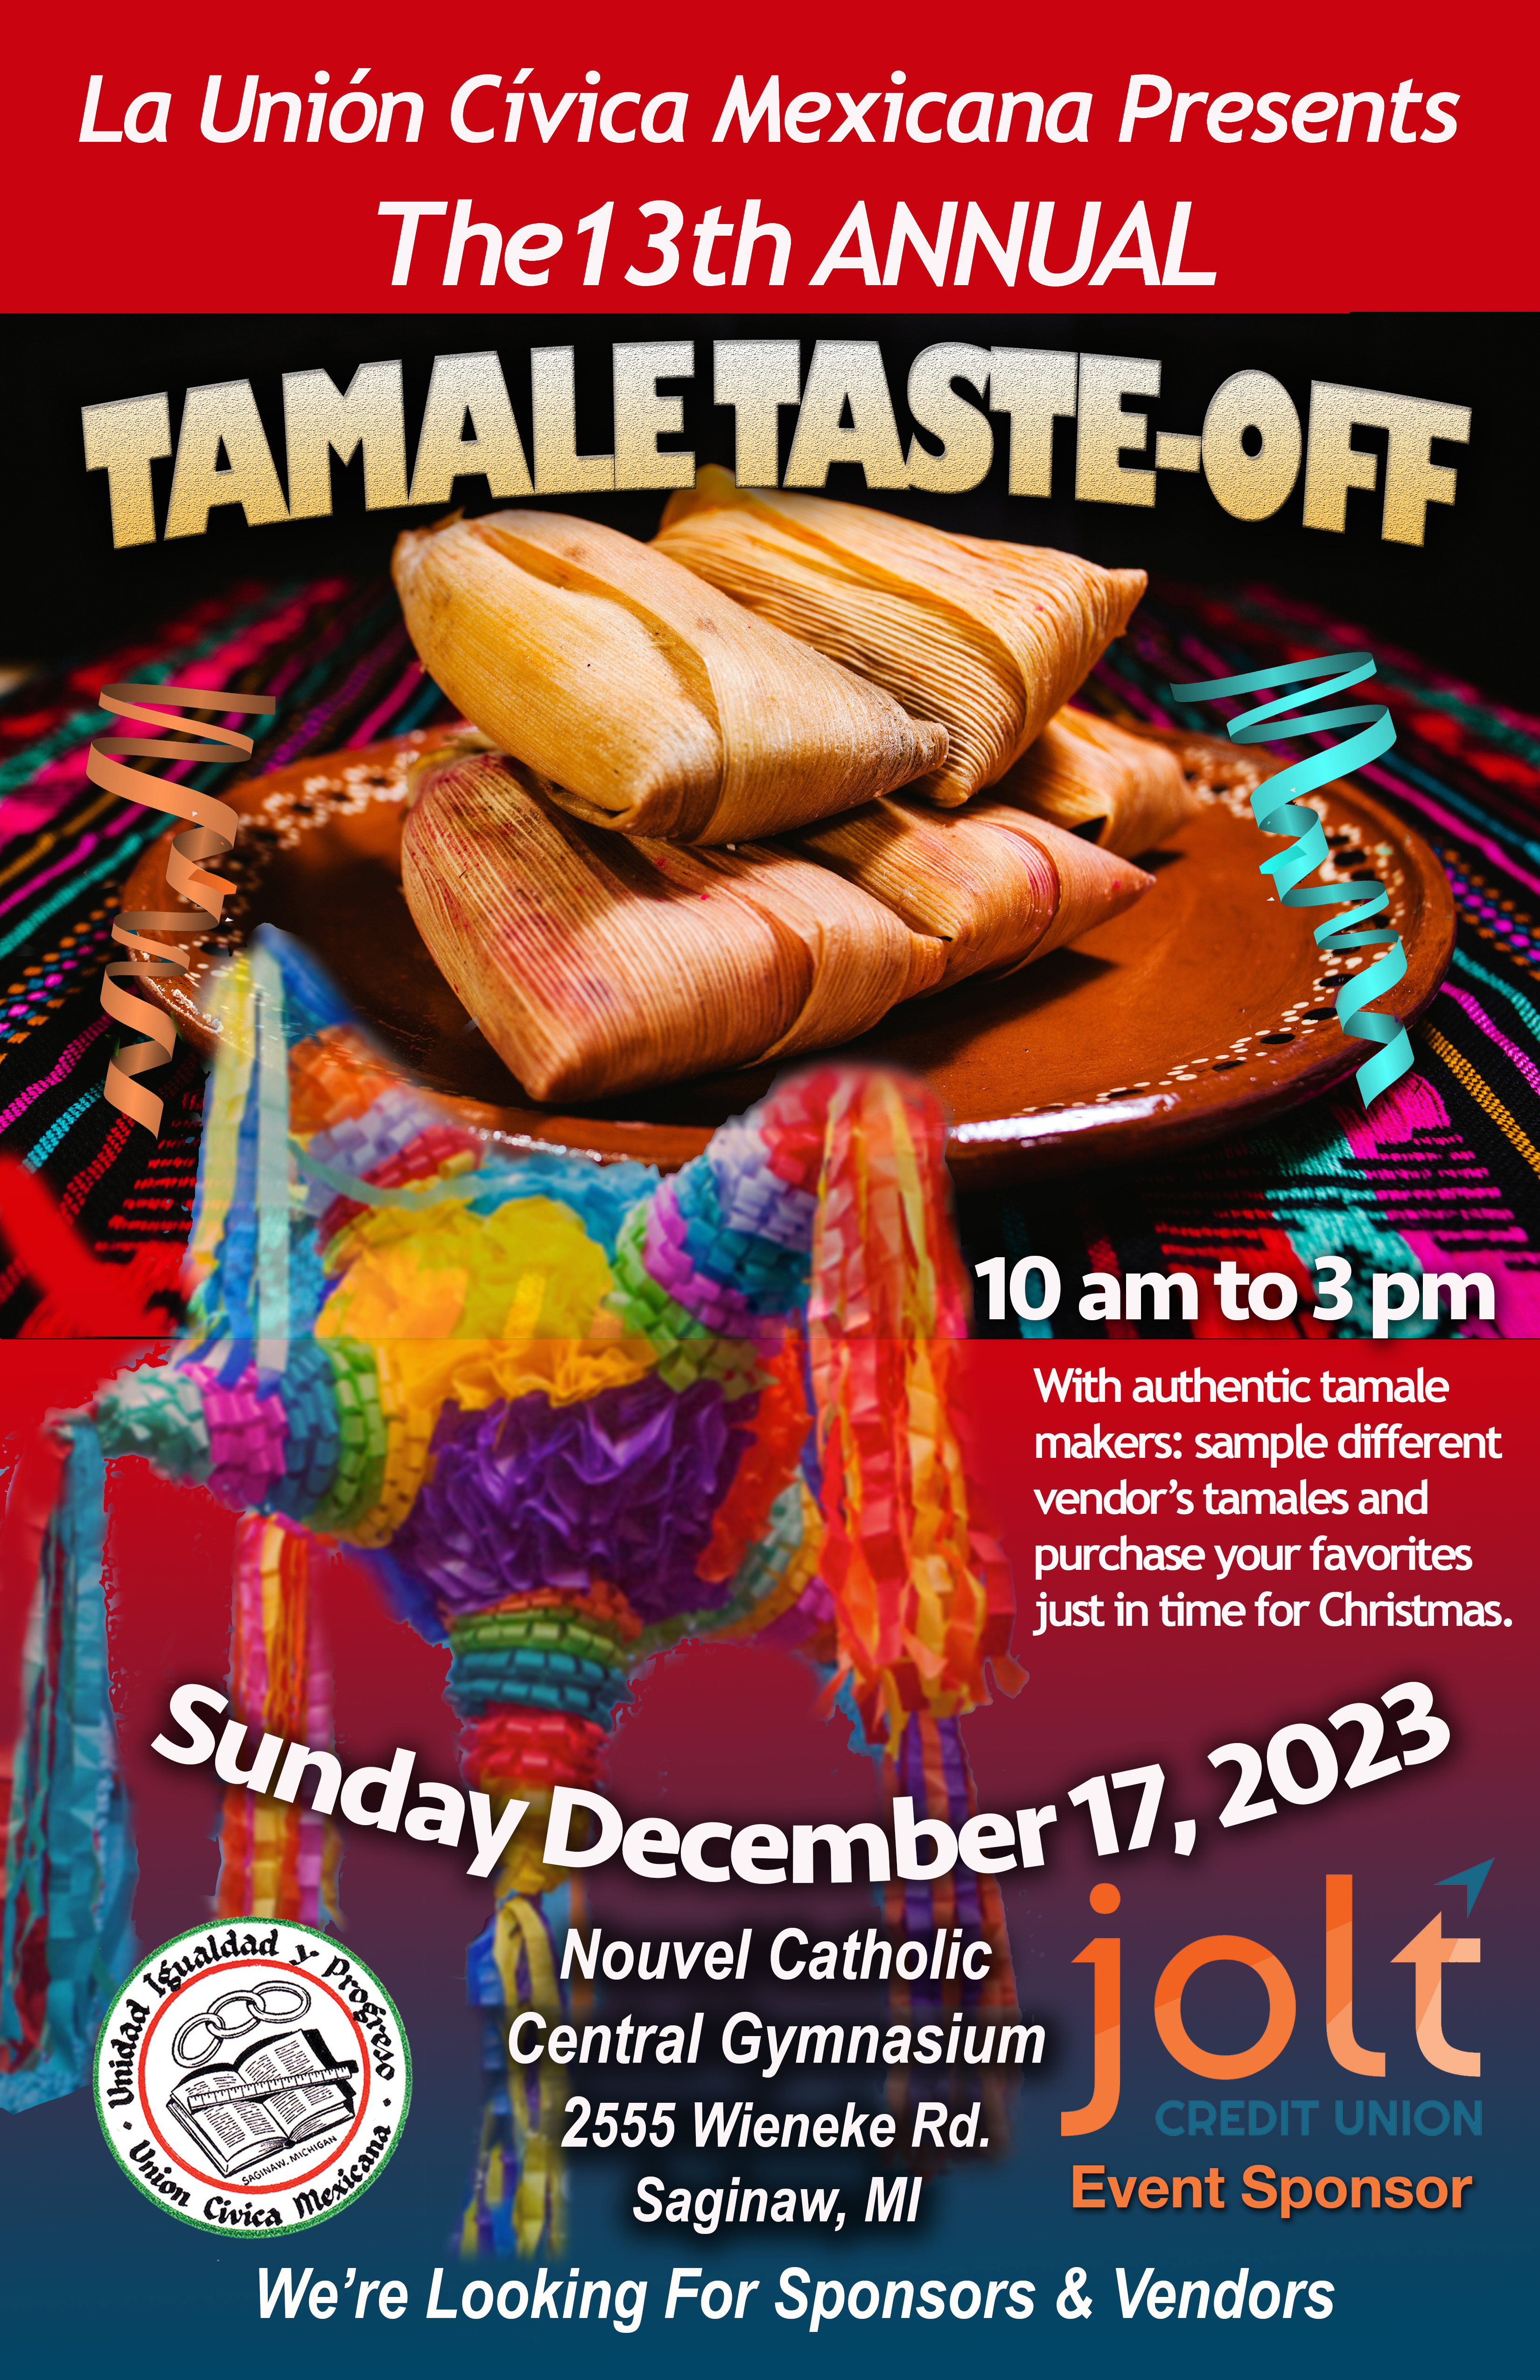 13th Annual Tamale Taste-Off Sunday December 17th, 10am-3pm. Nouvel High School. 